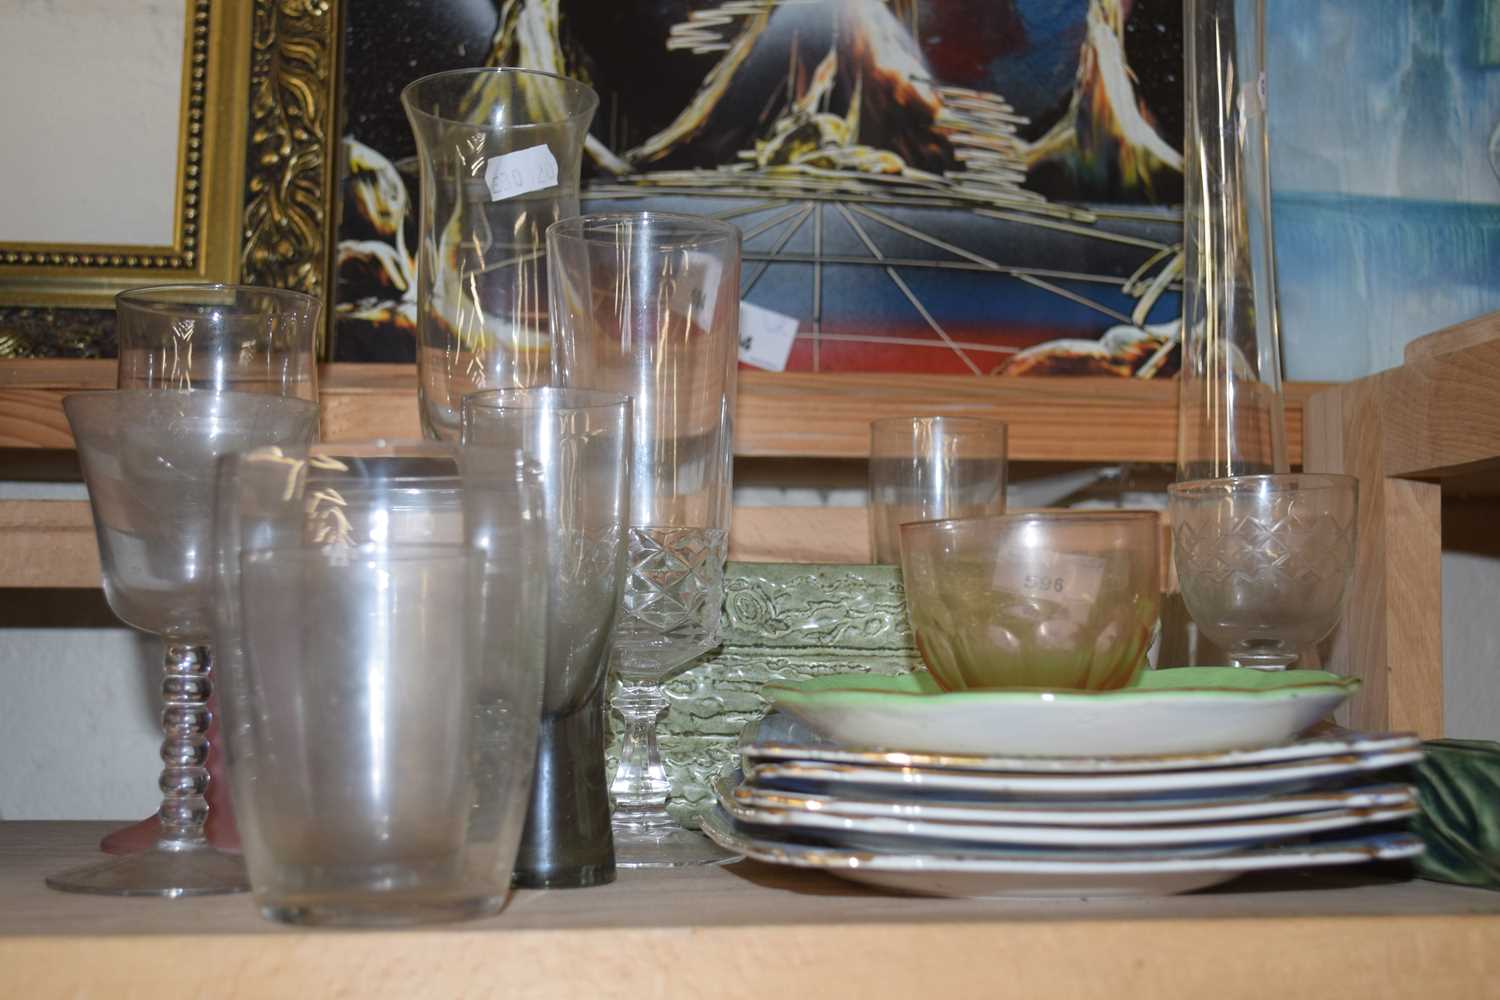 Quantity of mixed glass ware and ceramics to include vases, drinking glasses, plates etc